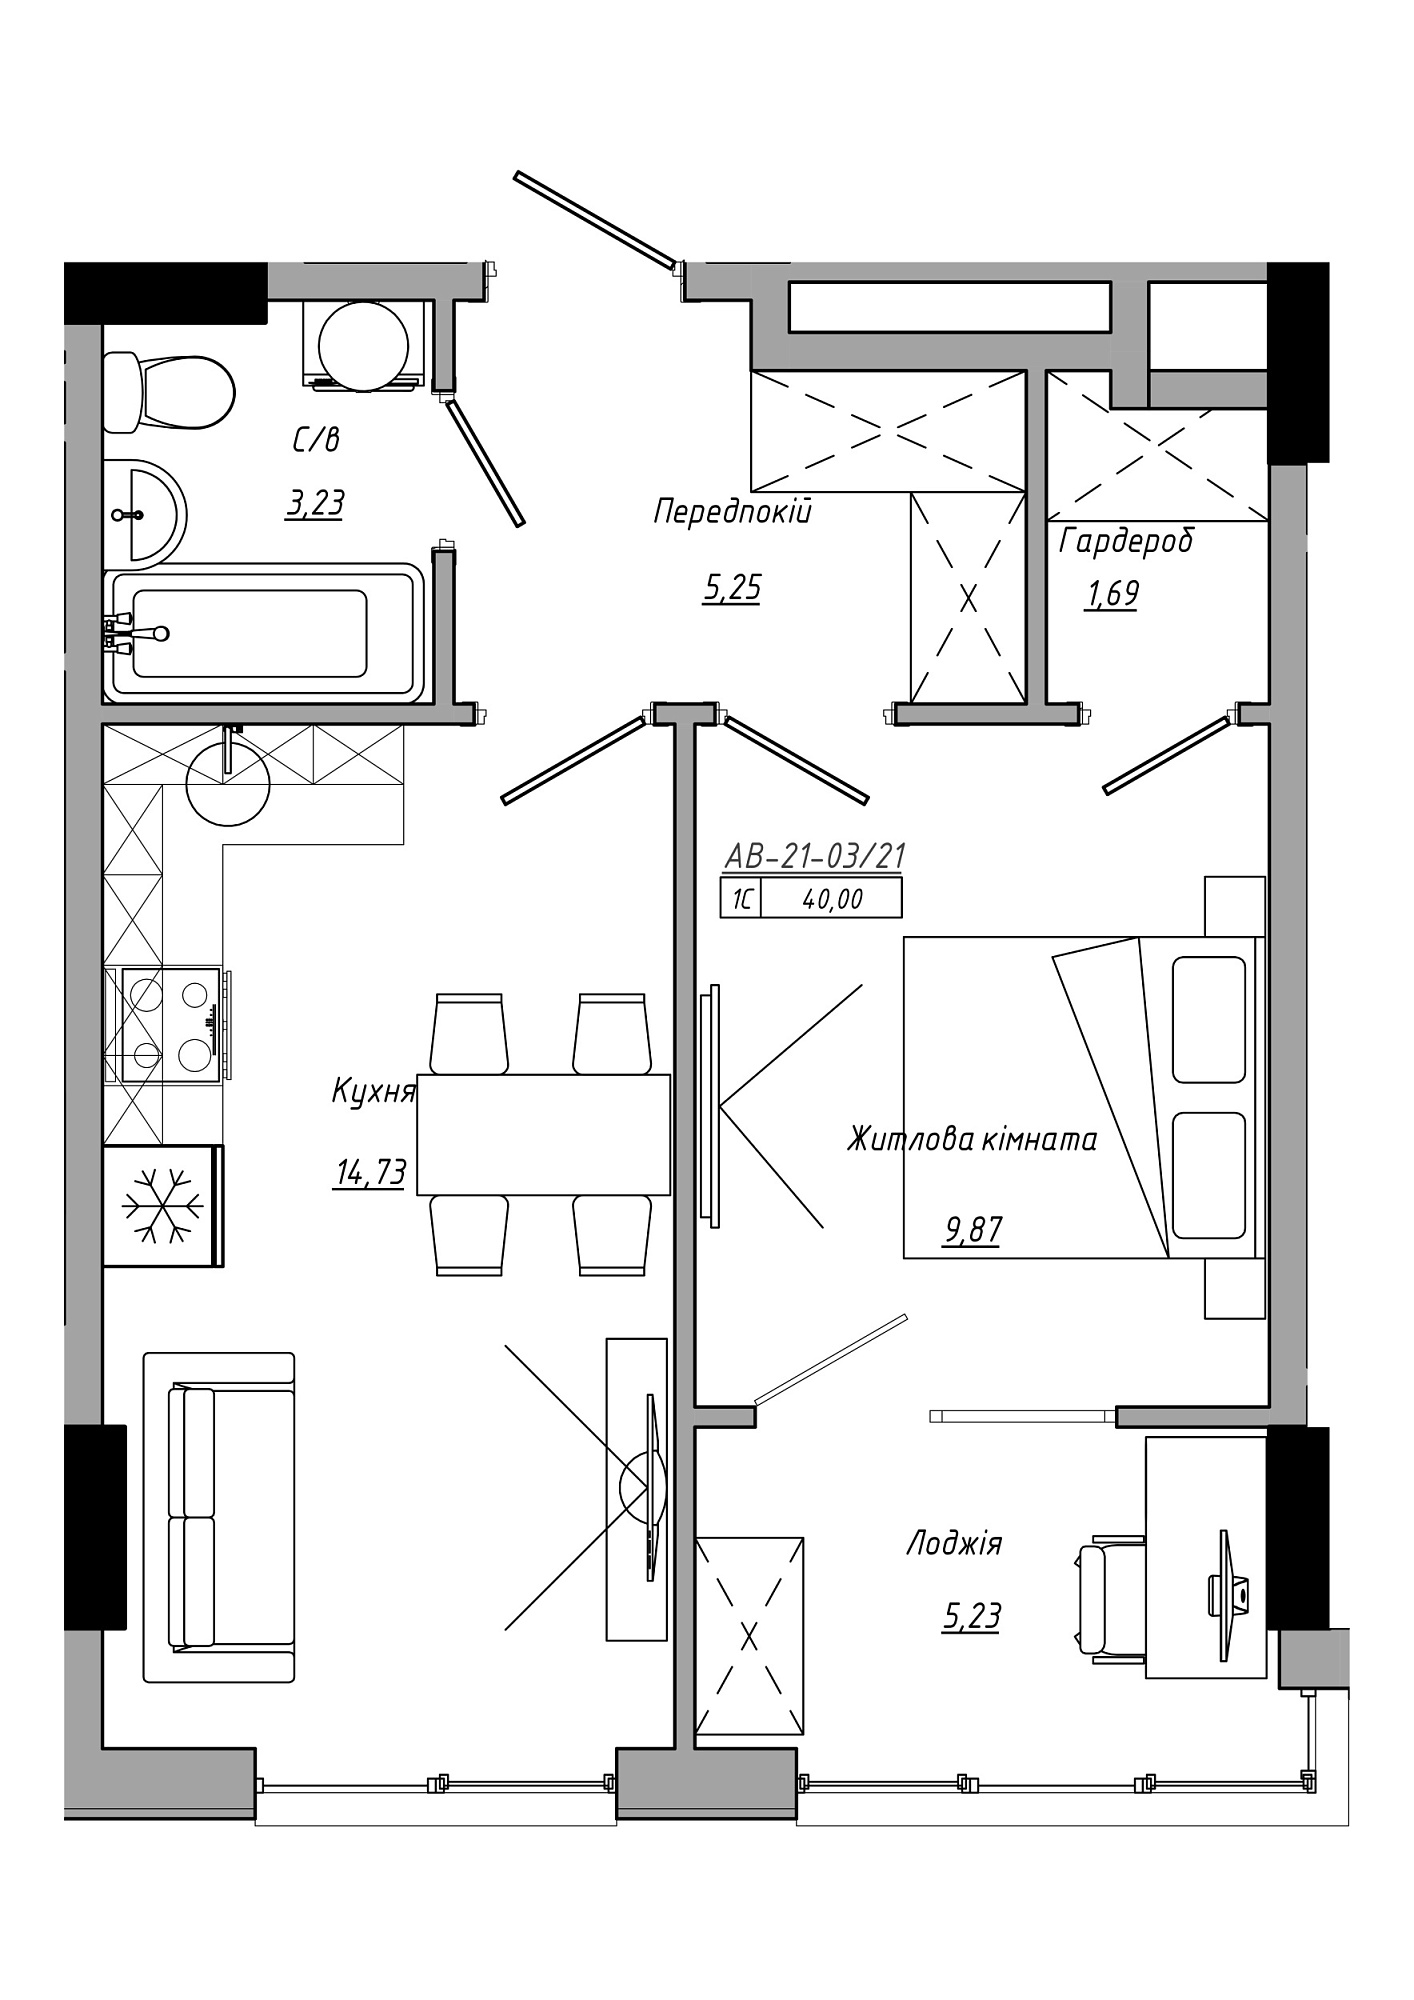 Planning 1-rm flats area 40m2, AB-21-03/00021.